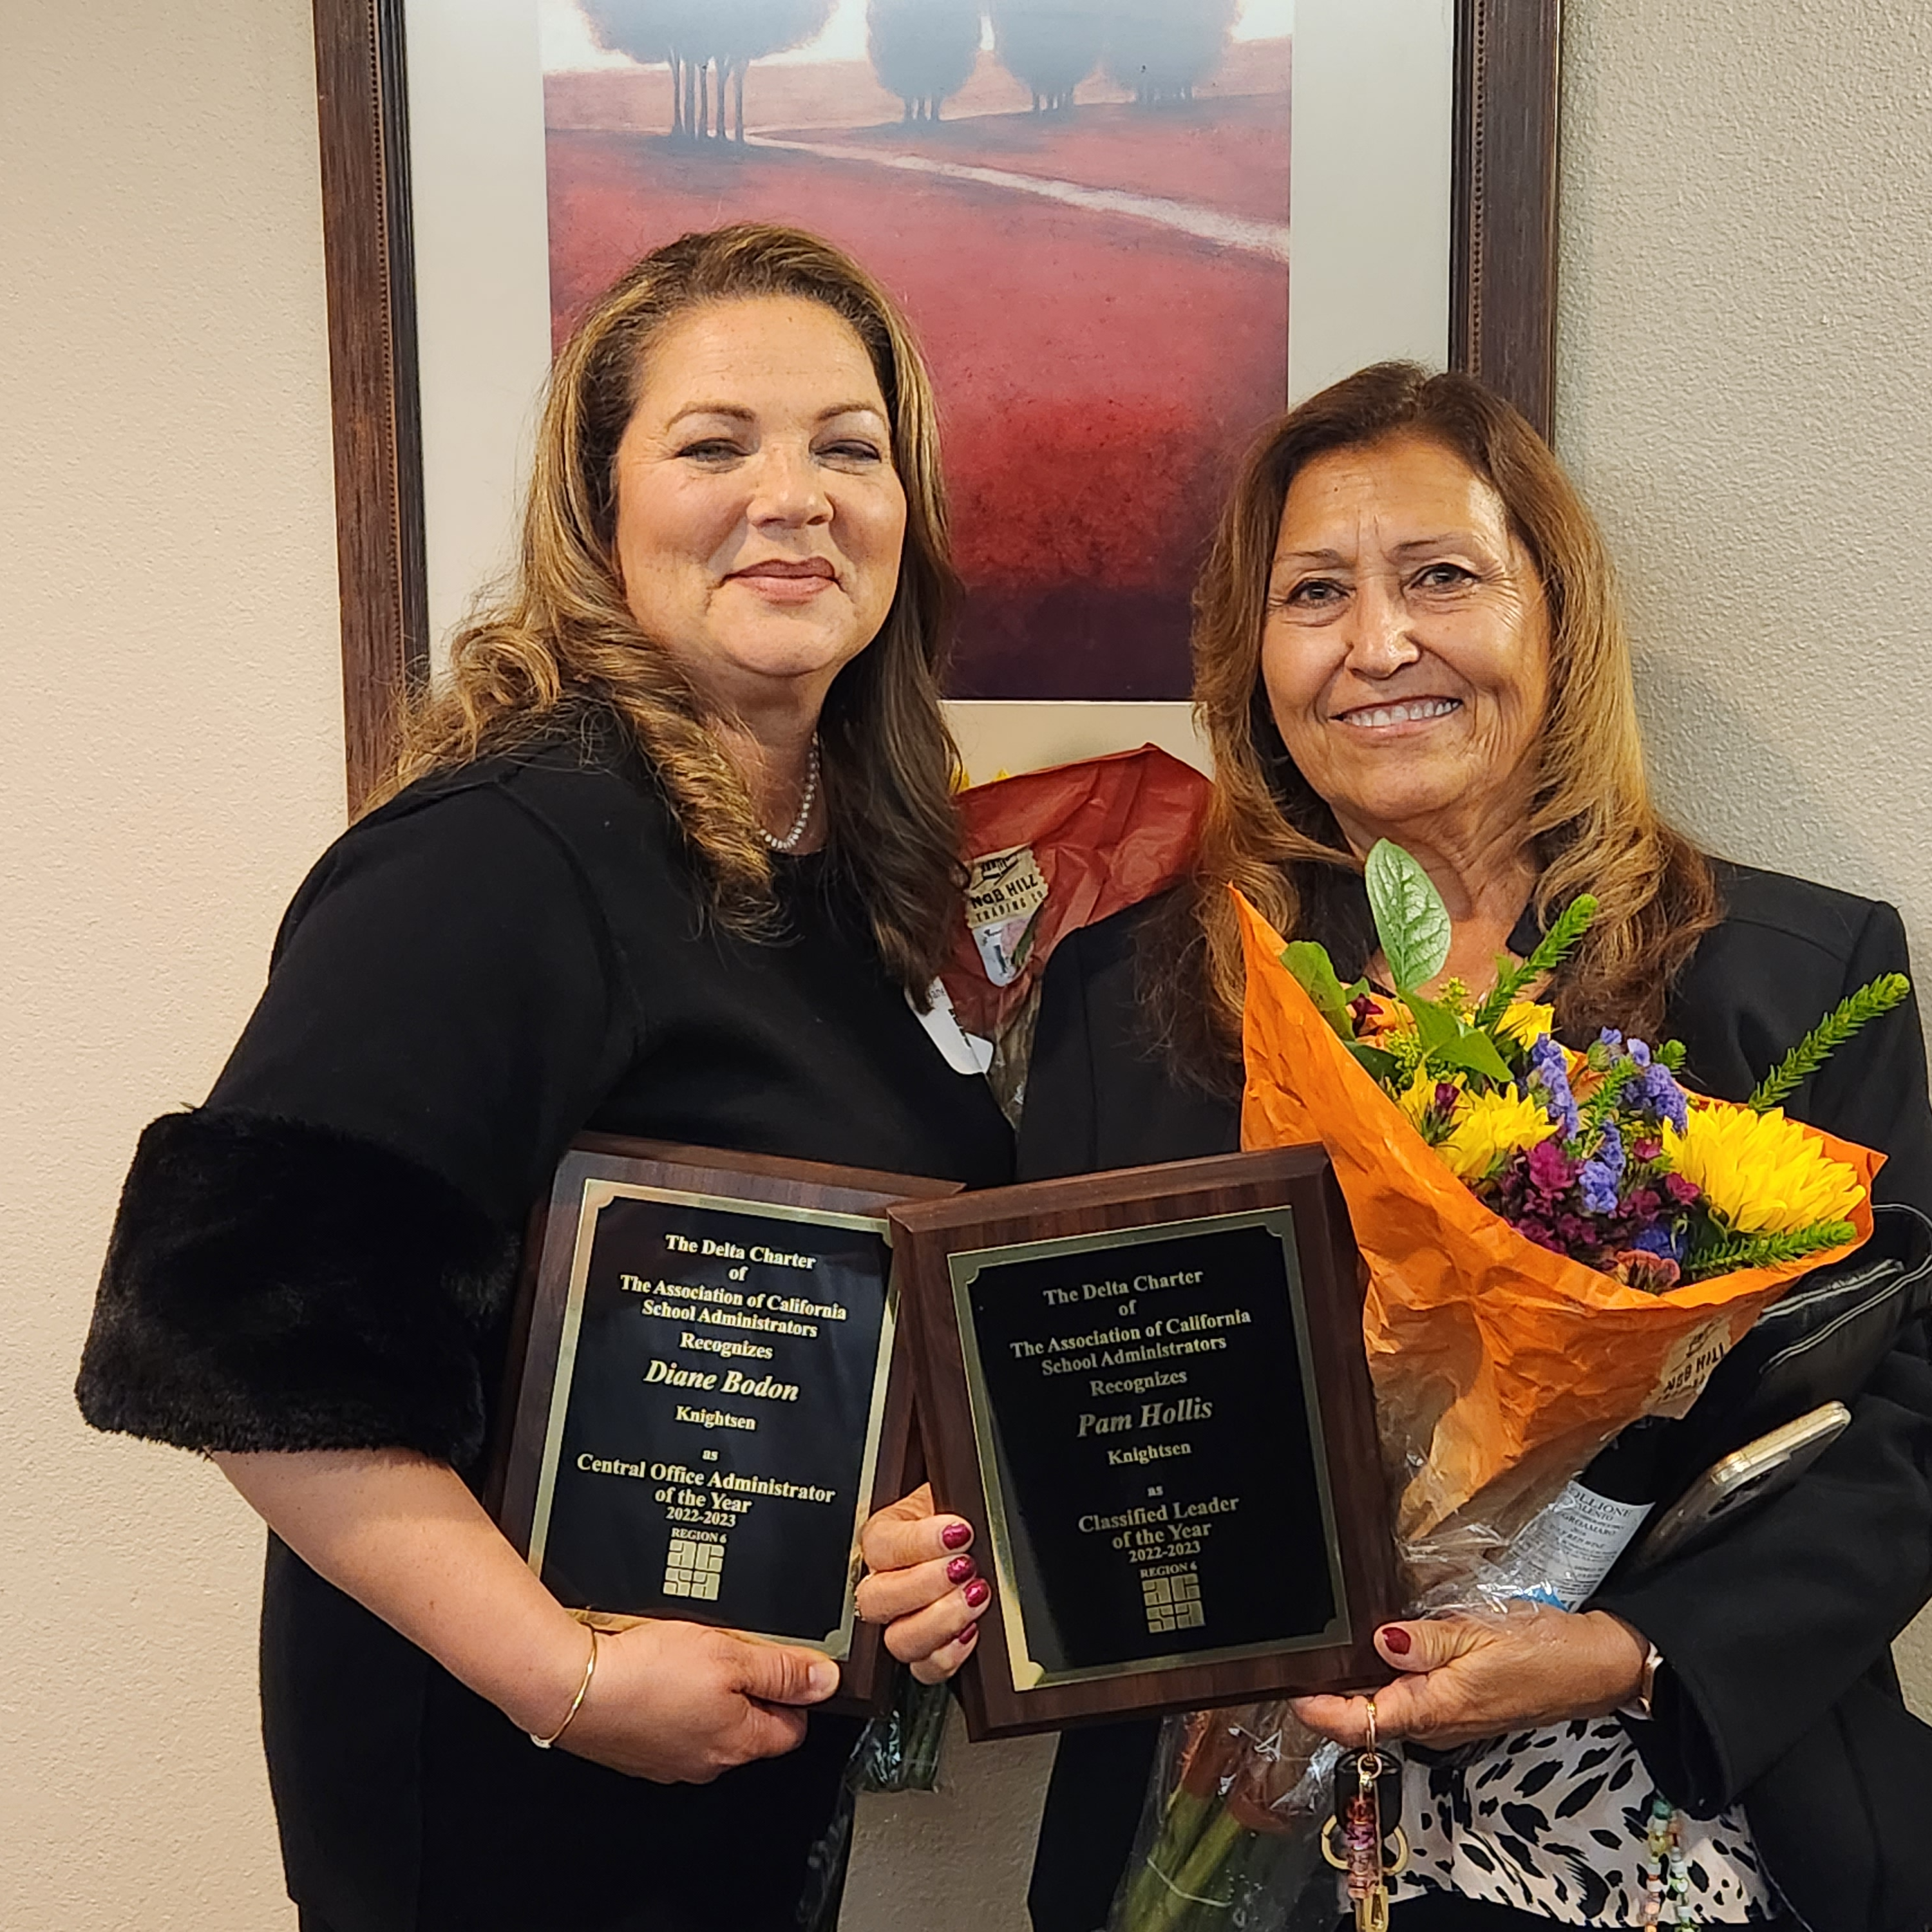 Diane Bodon (L) and Pam Hollis (R) Recognized for outstanding leadership at the ACSA Delta Charter Awards. 